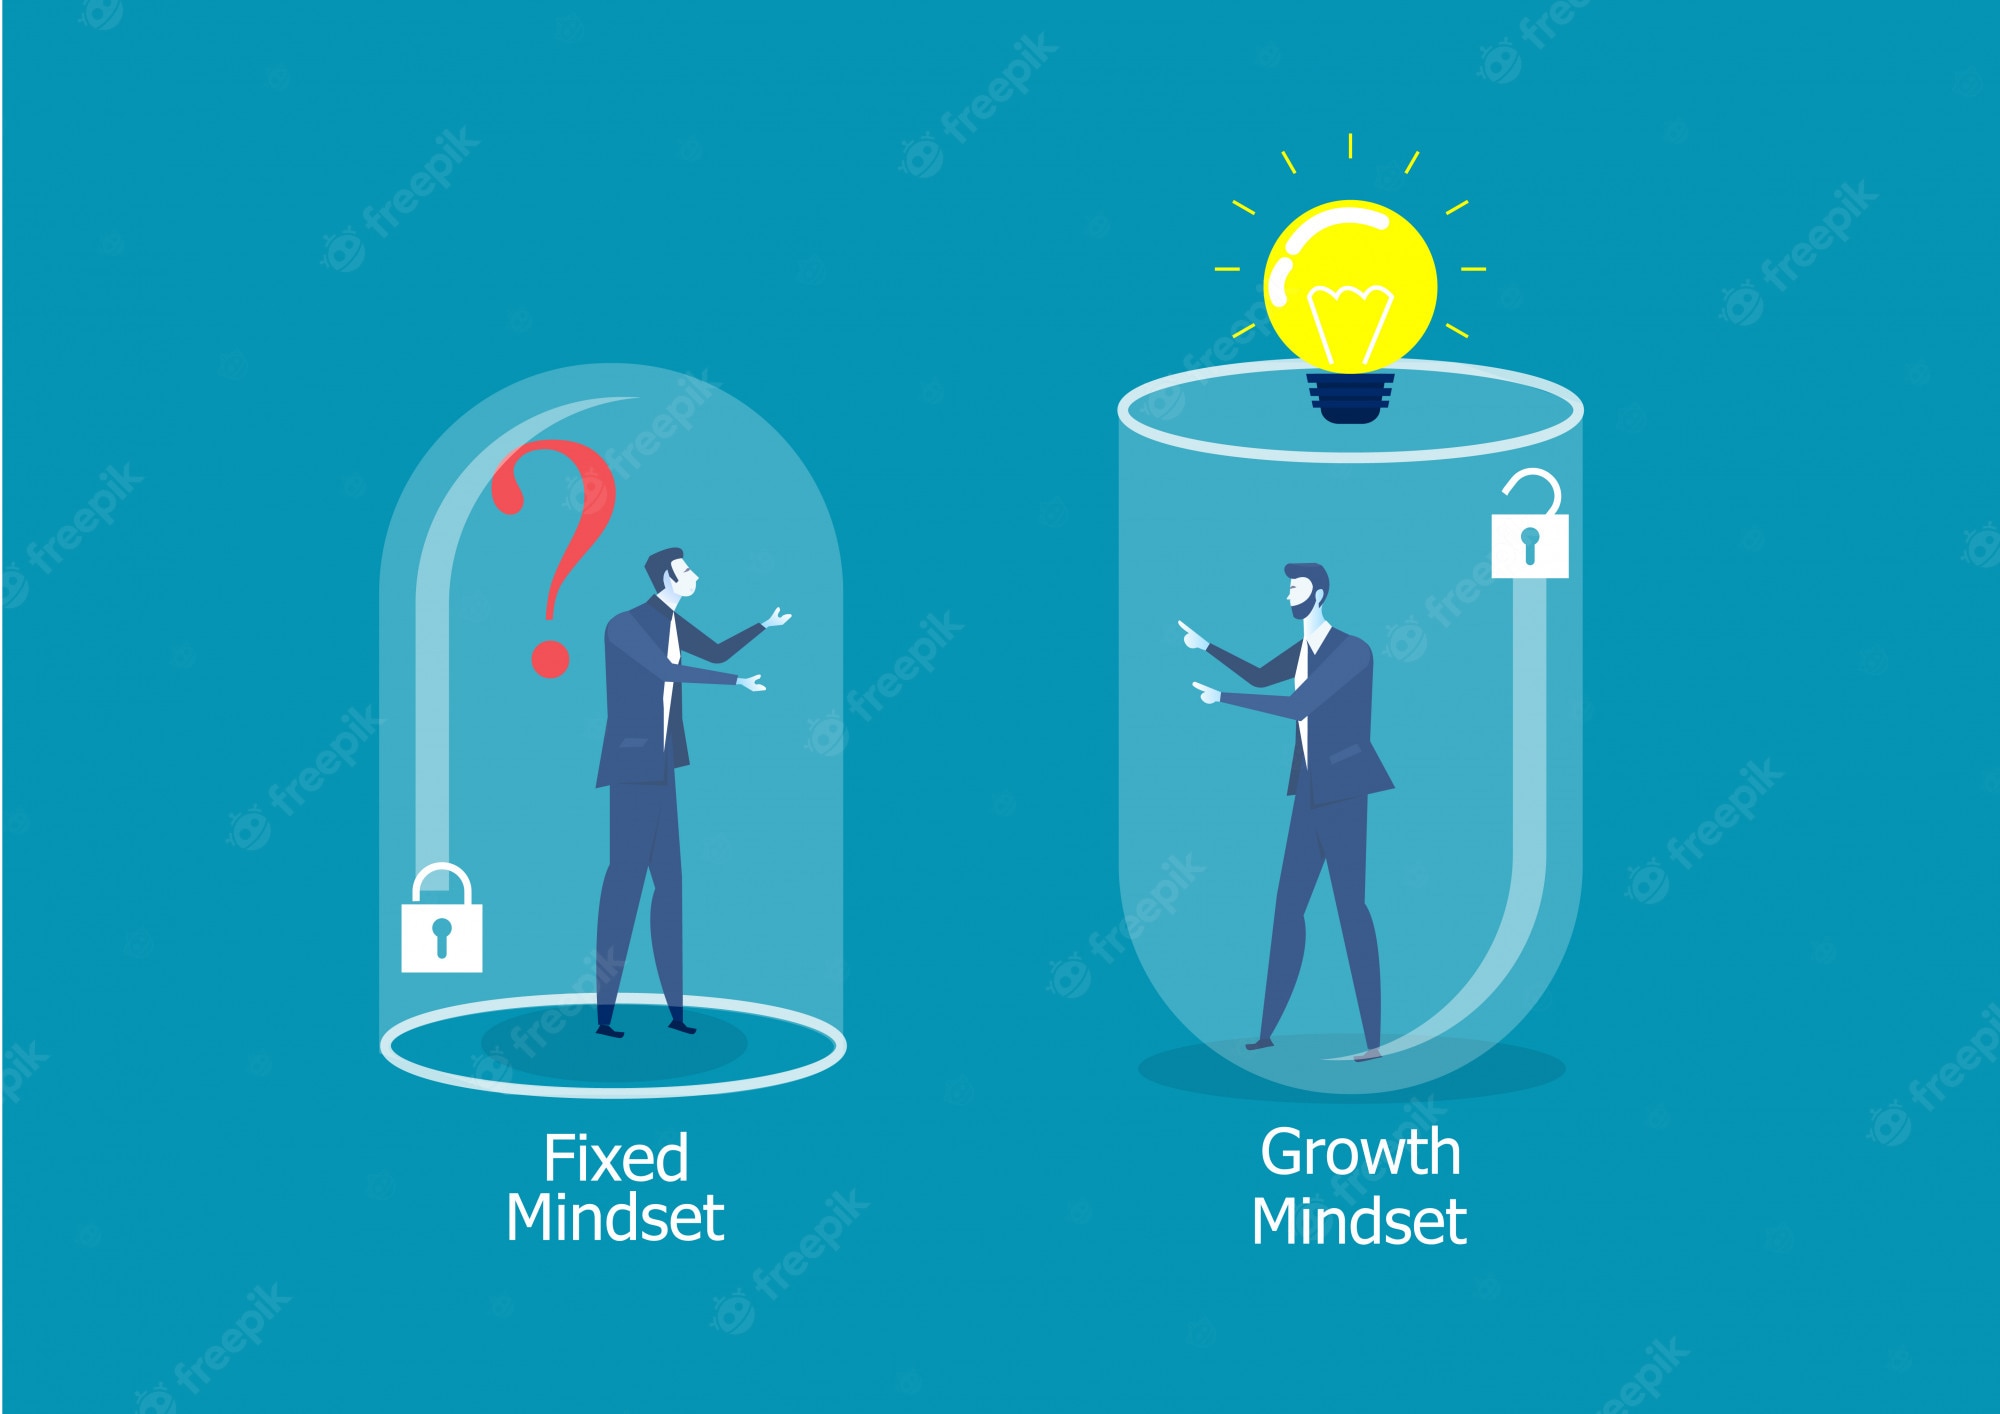 Growth Fixed Mindset Image. Free Vectors, & PSD